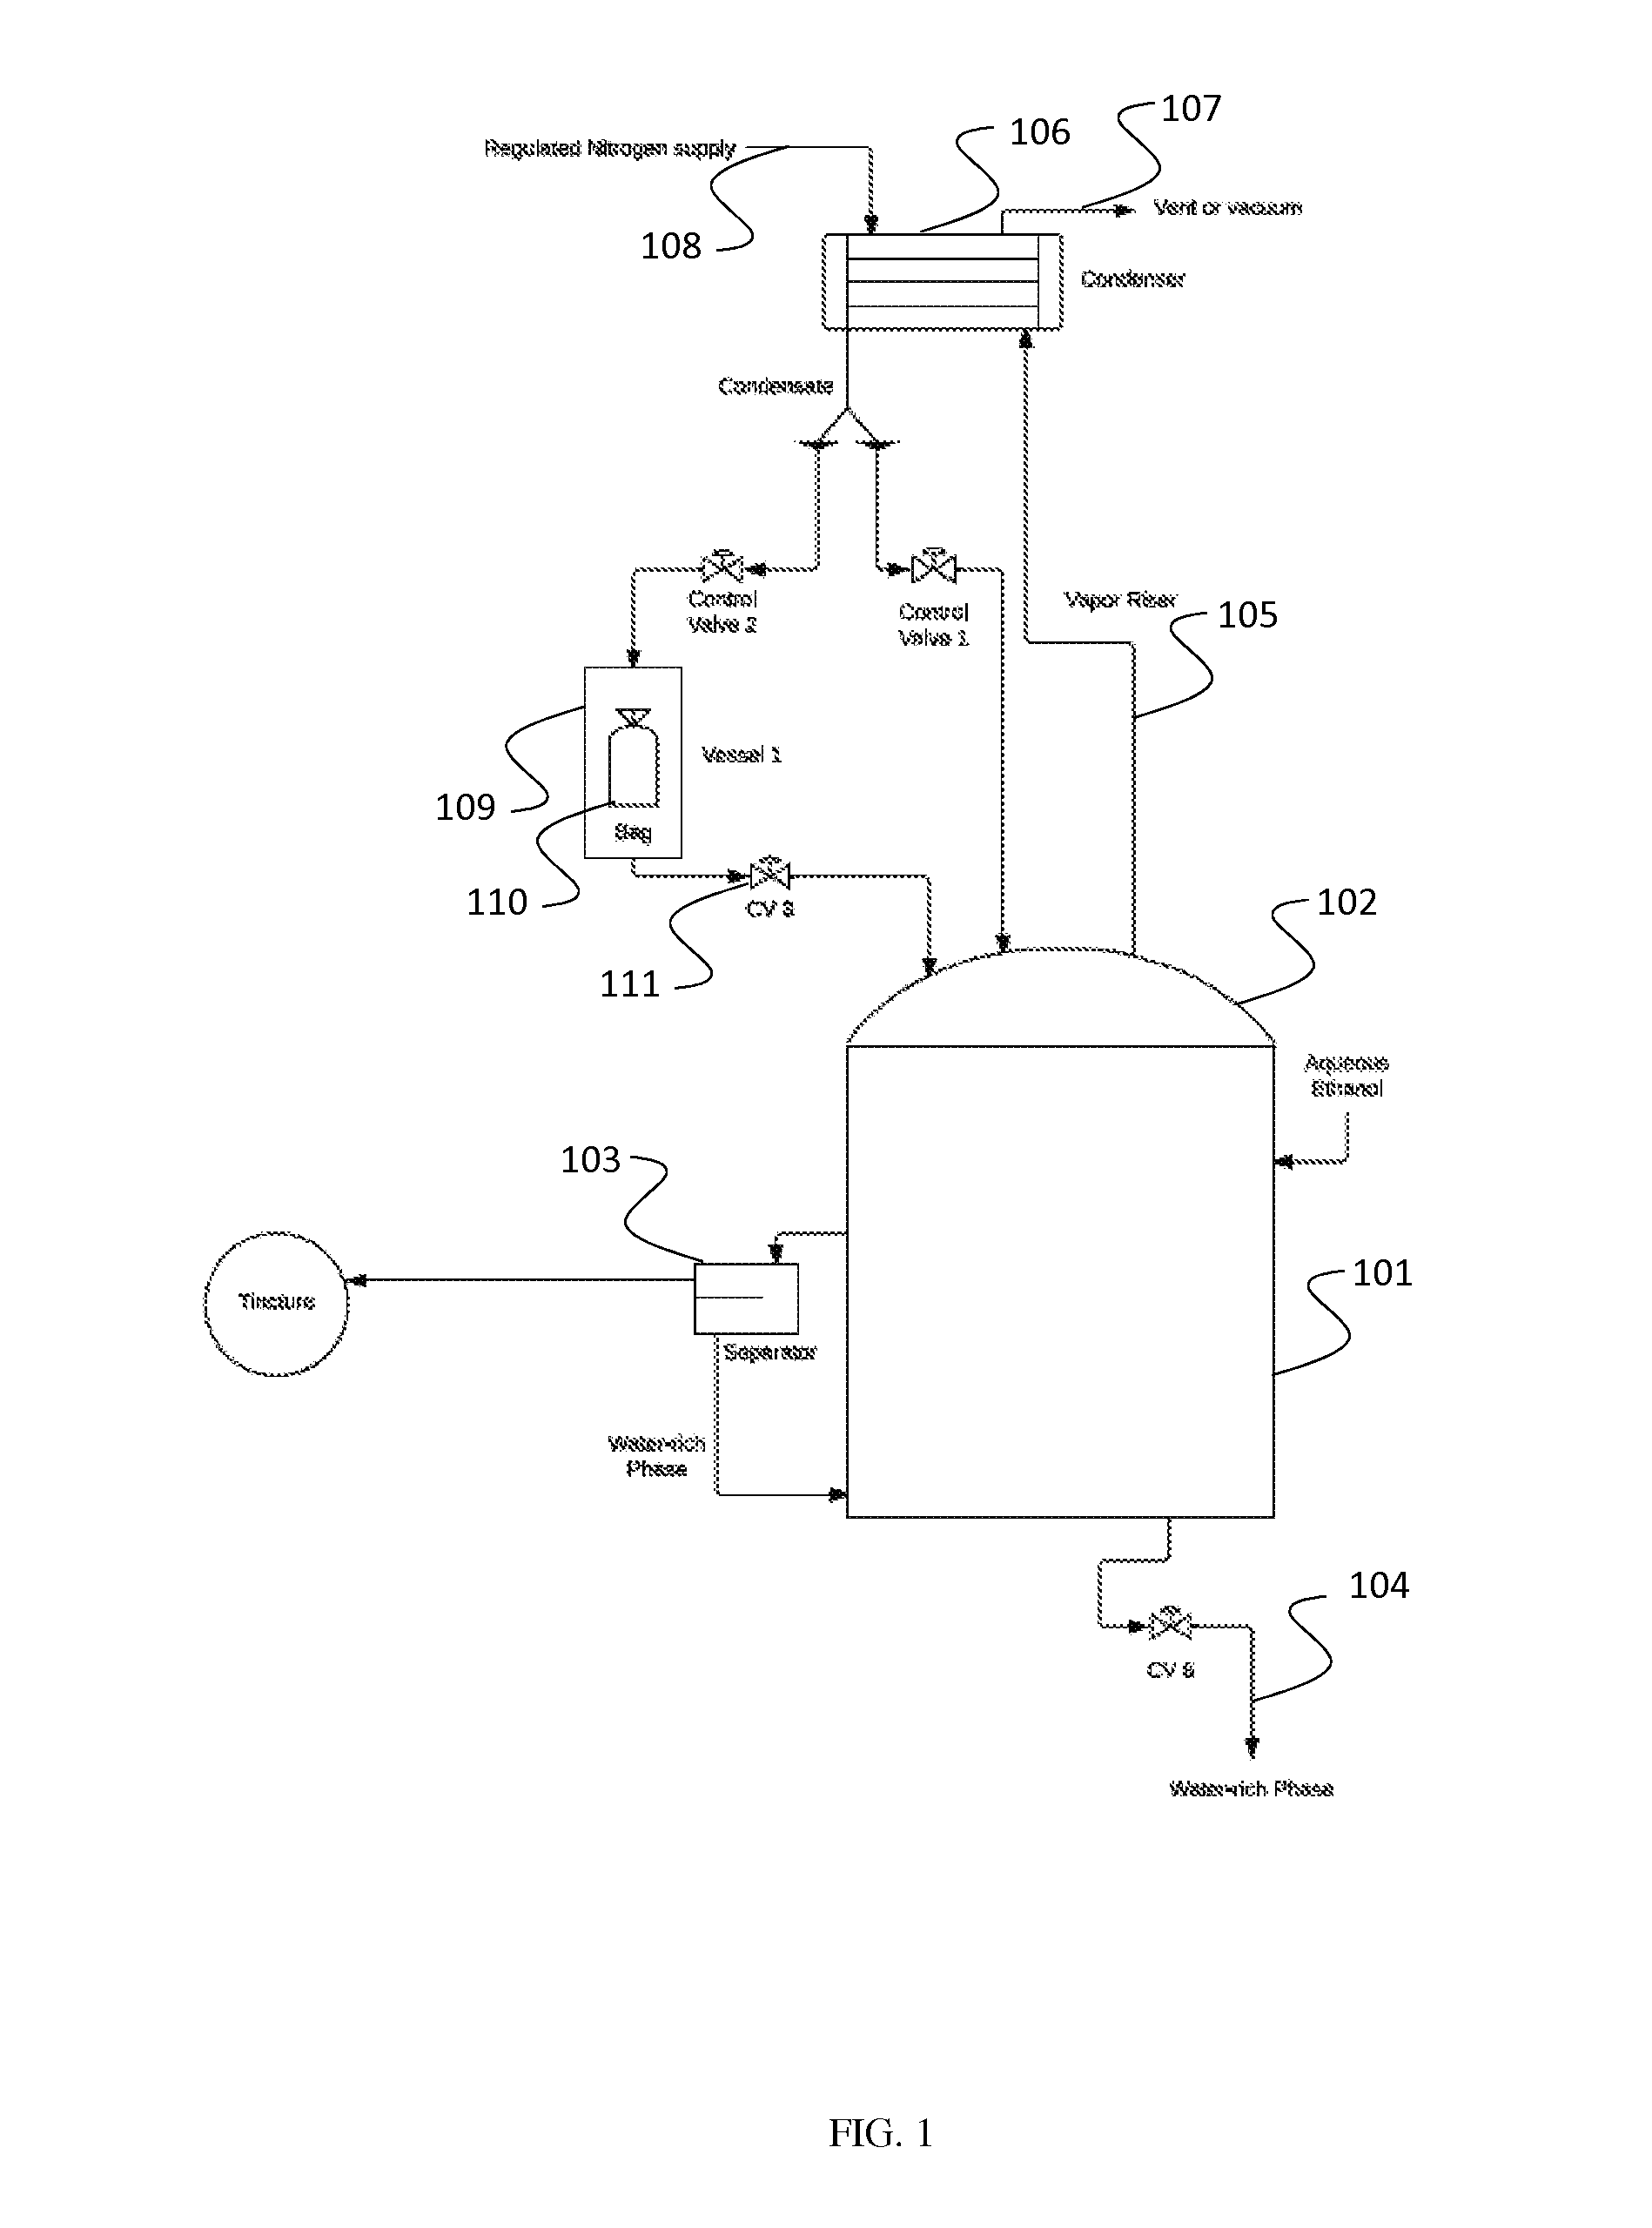 Method and Apparatus for Extracting Plant Oils Using Ethanol Water